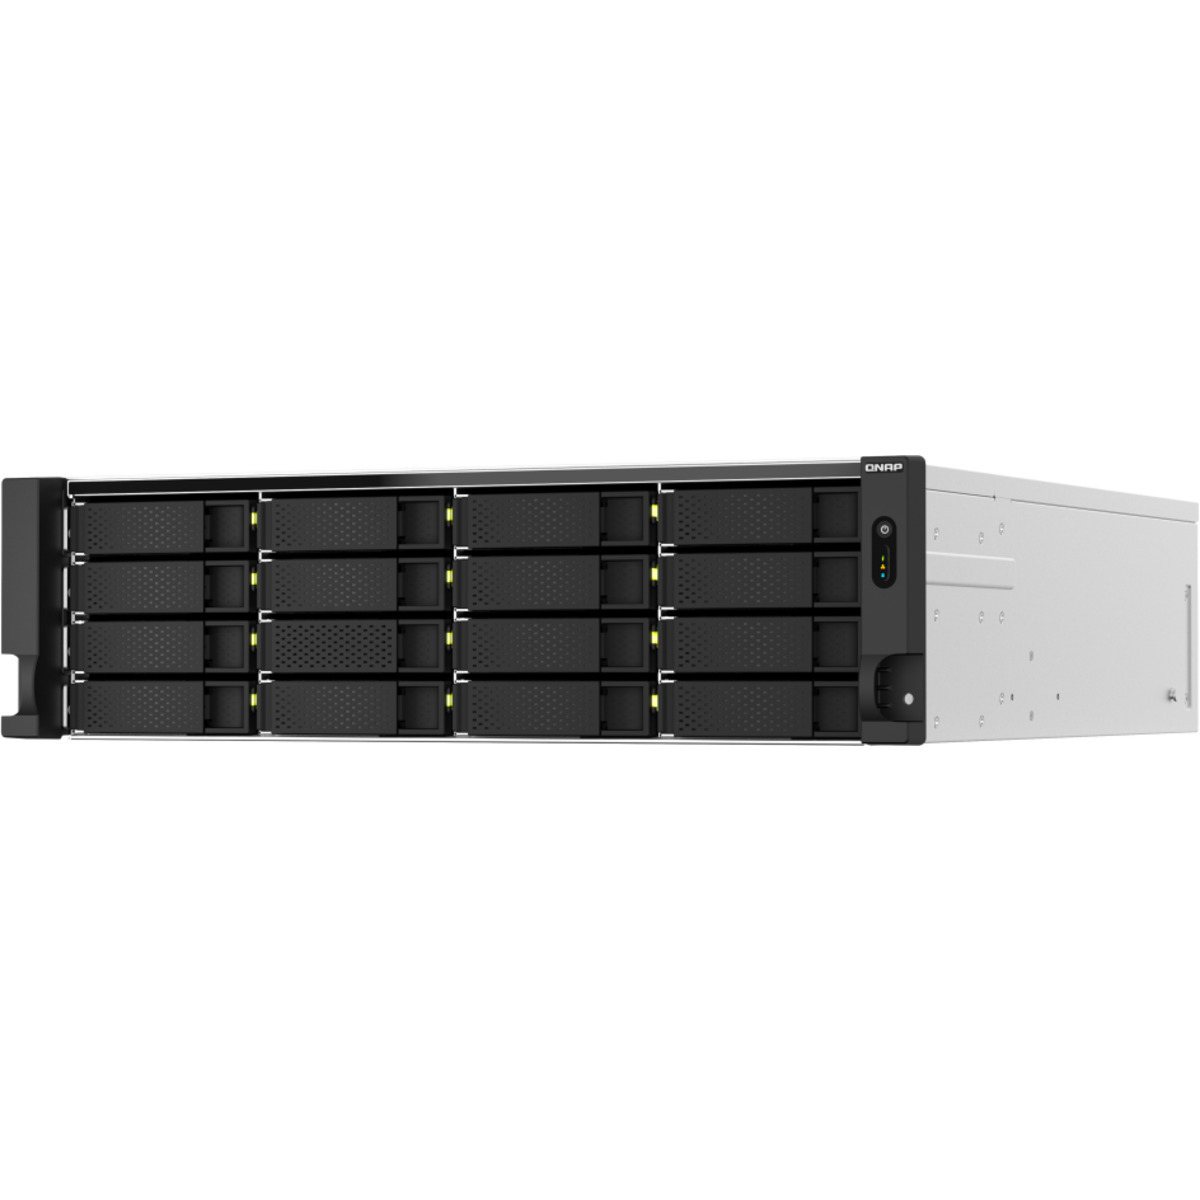 QNAP TS-h2287XU-RP E-2378 QuTS hero Edition RackMount 16+6-Bay Large Business / Enterprise NAS - Network Attached Storage Device Burn-In Tested Configurations TS-h2287XU-RP E-2378 QuTS hero Edition